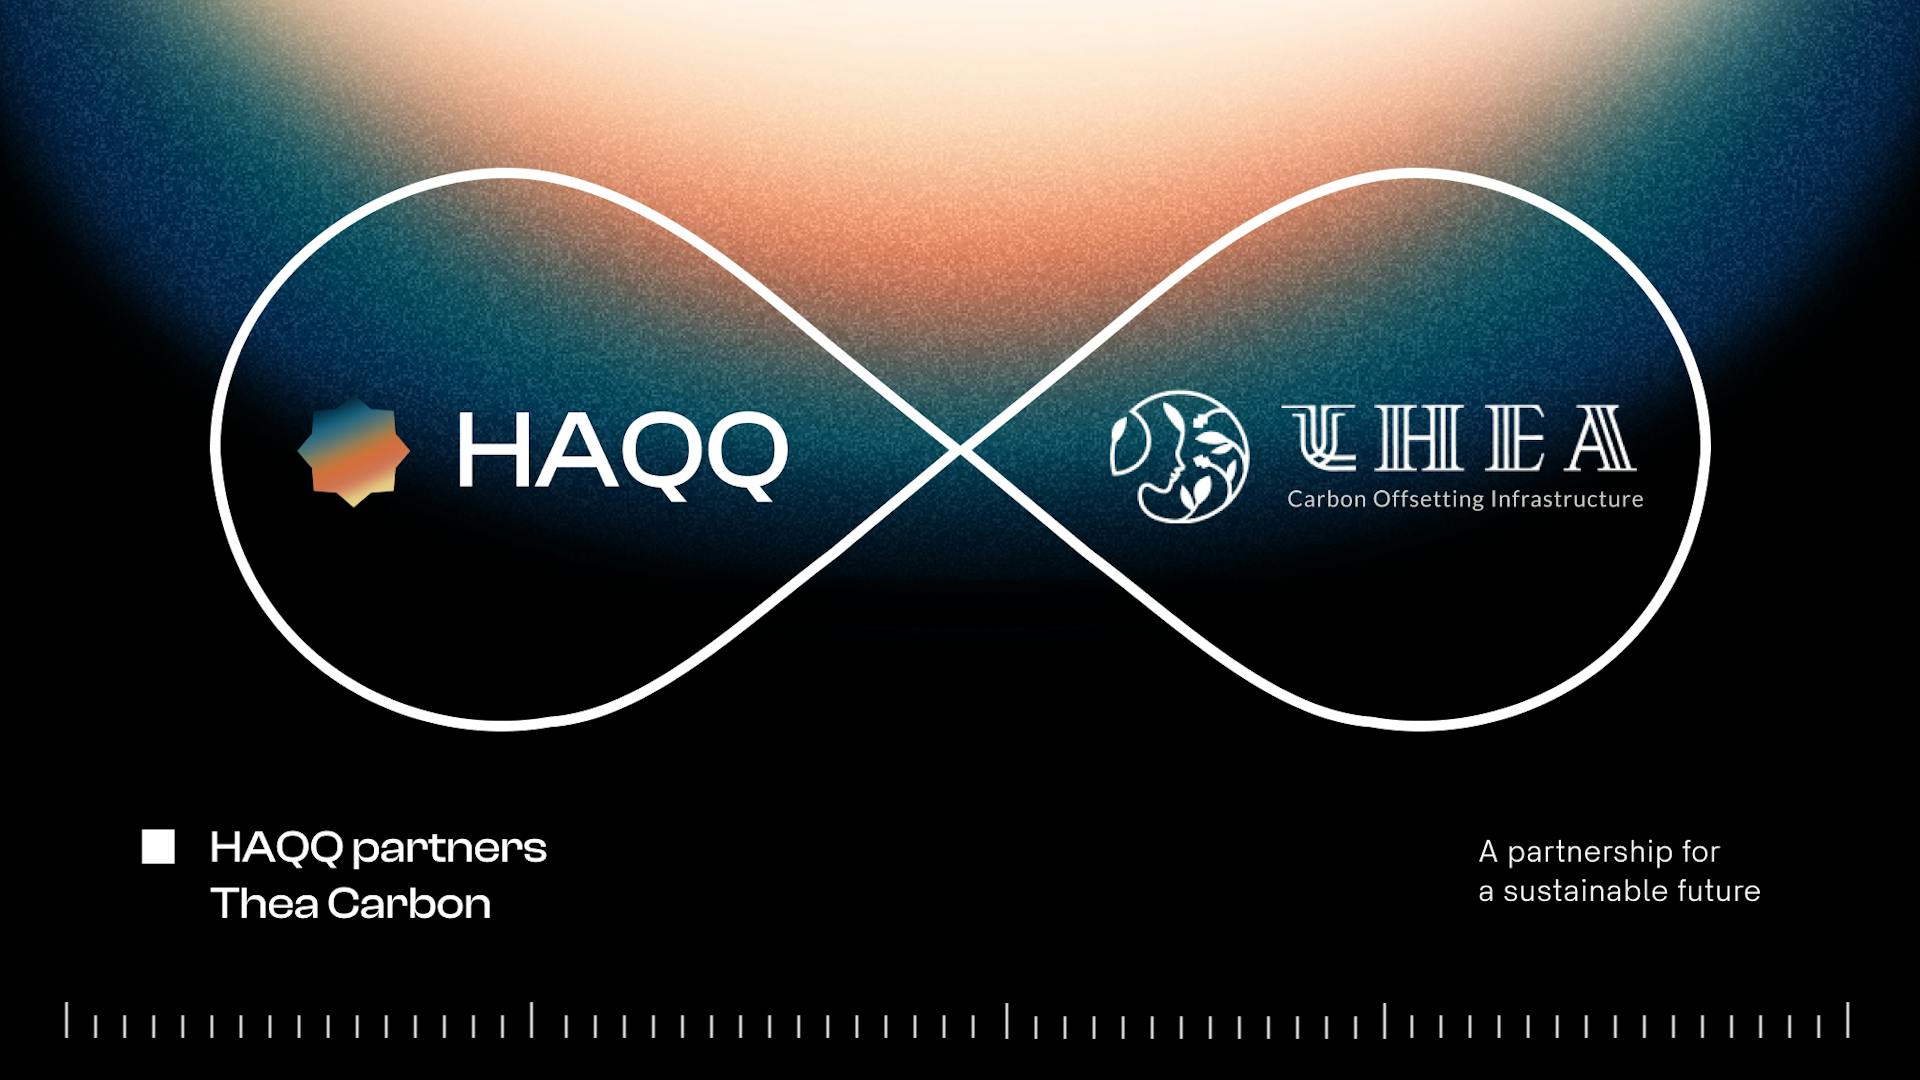 HAQQ and Thea Carbon: A Partnership for a Sustainable Future